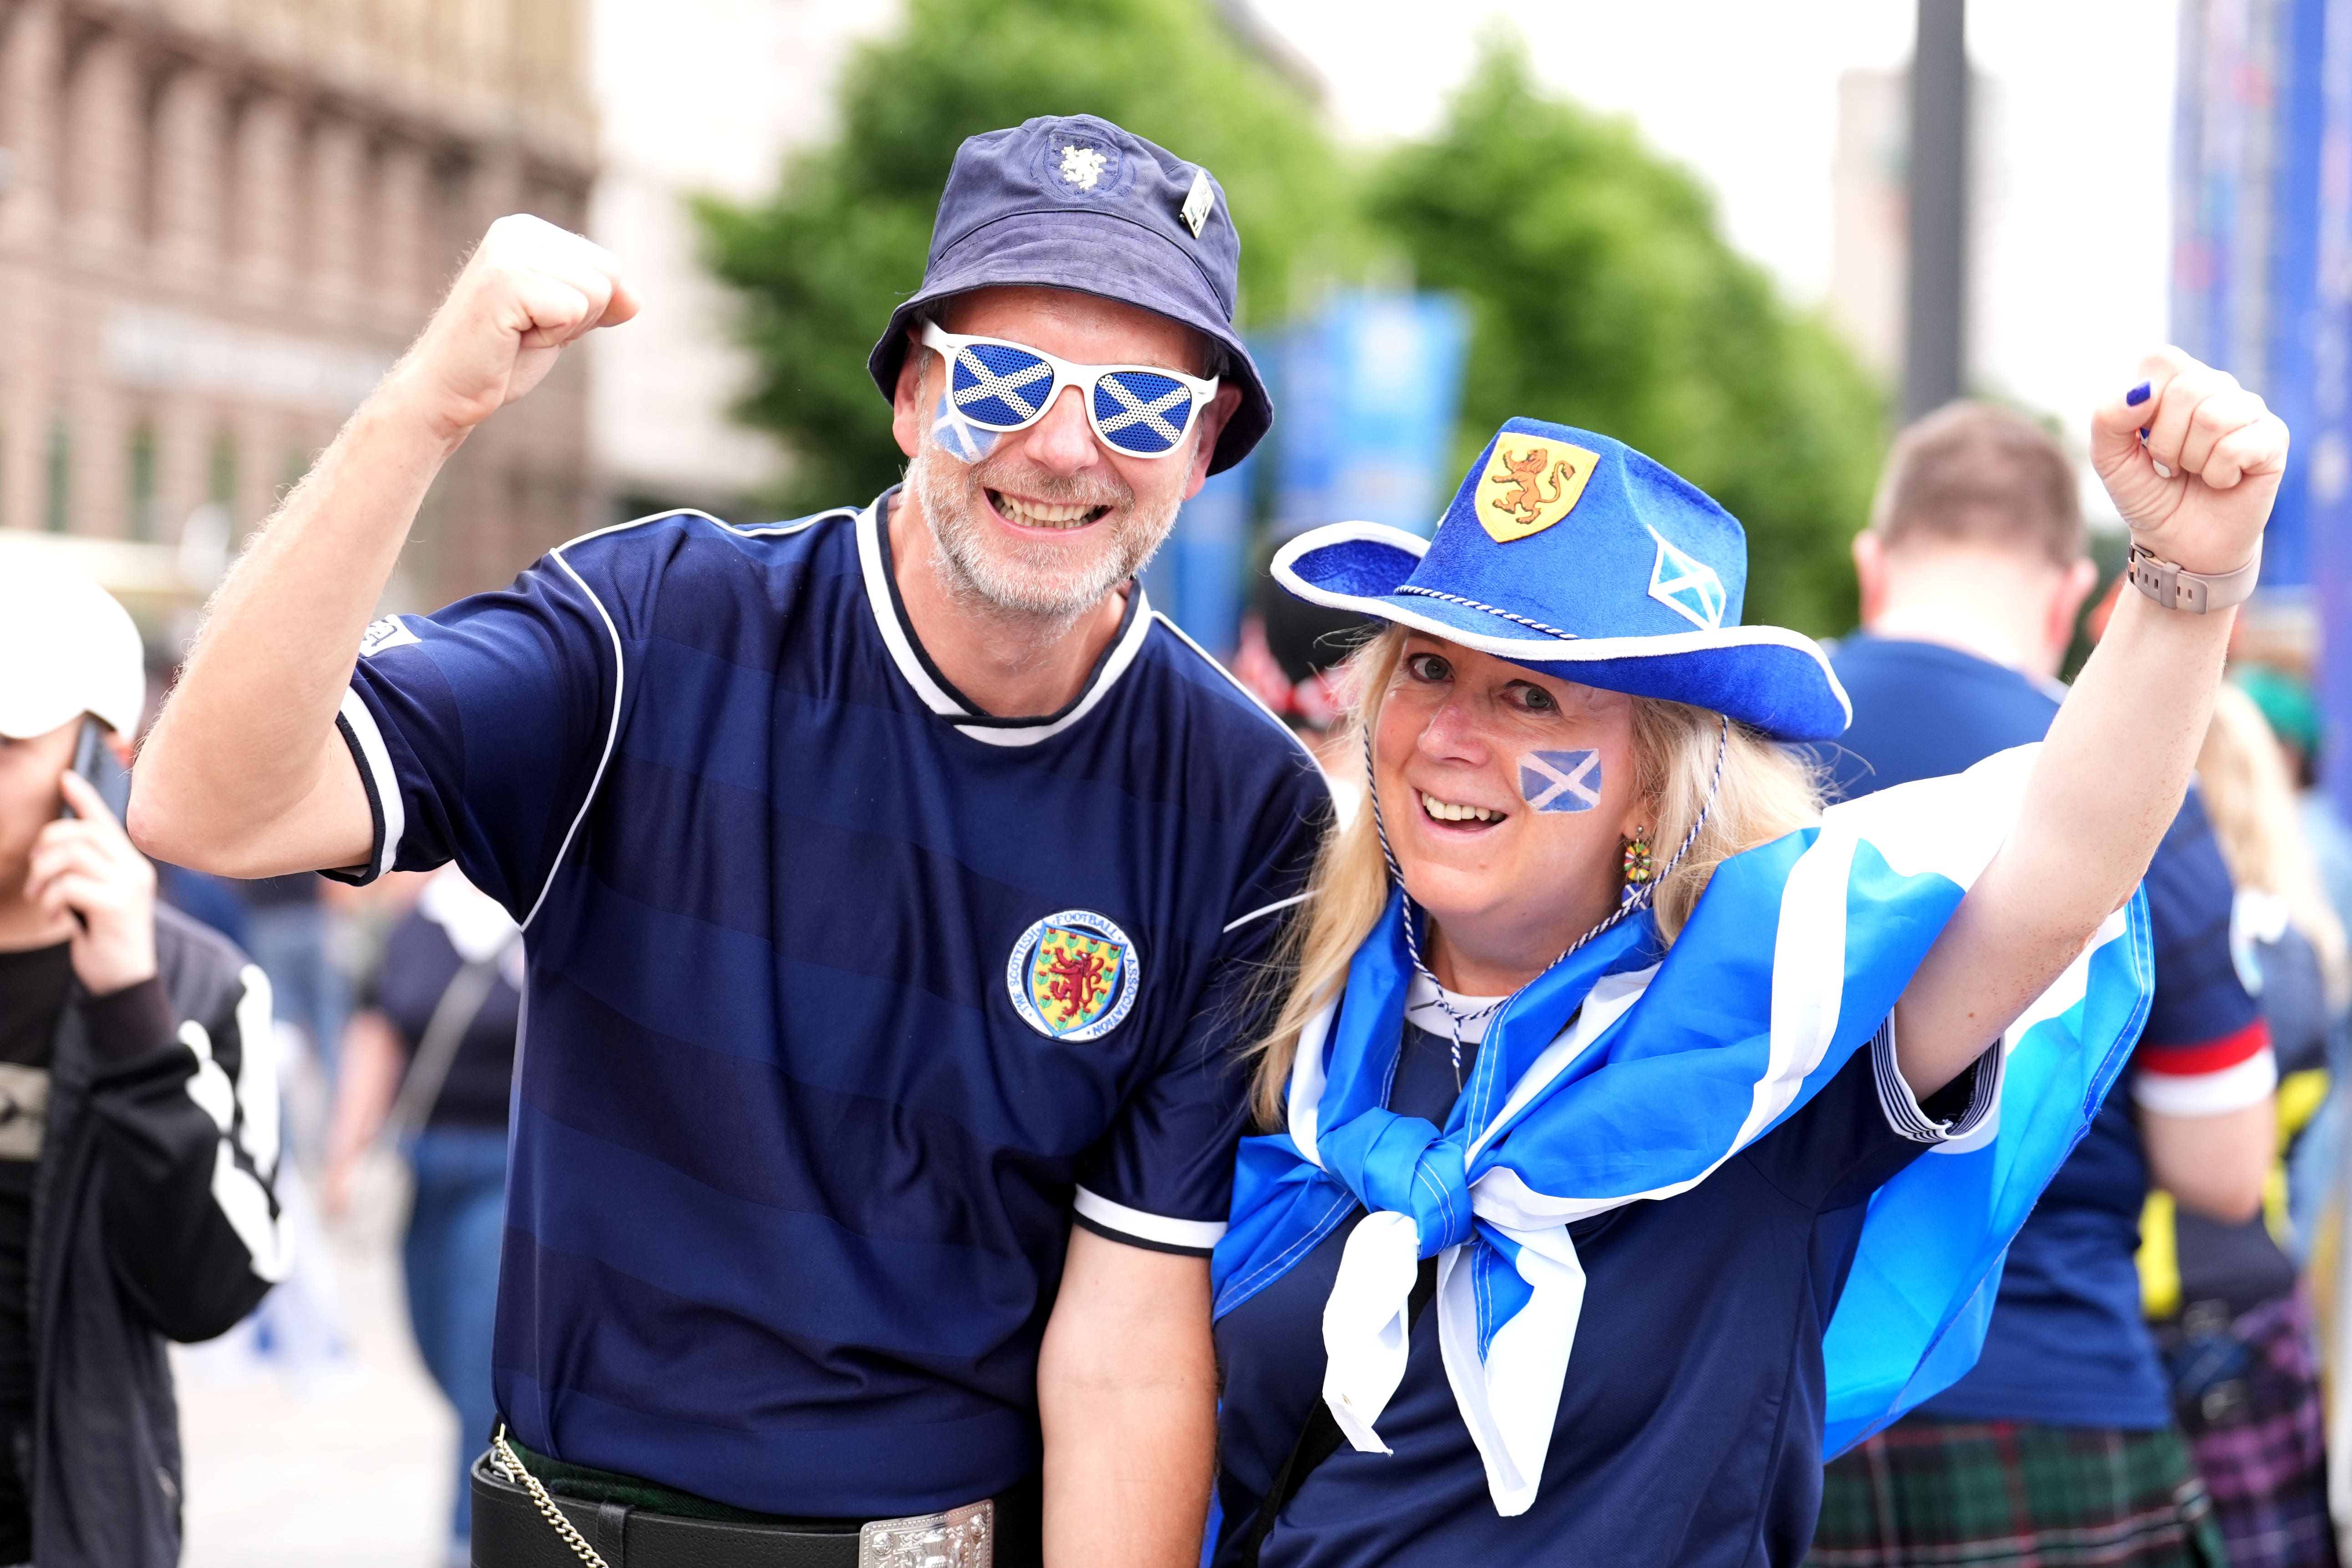 Scotland fans have been hailed as ‘fantastic ambassadors’ for the country (PA)